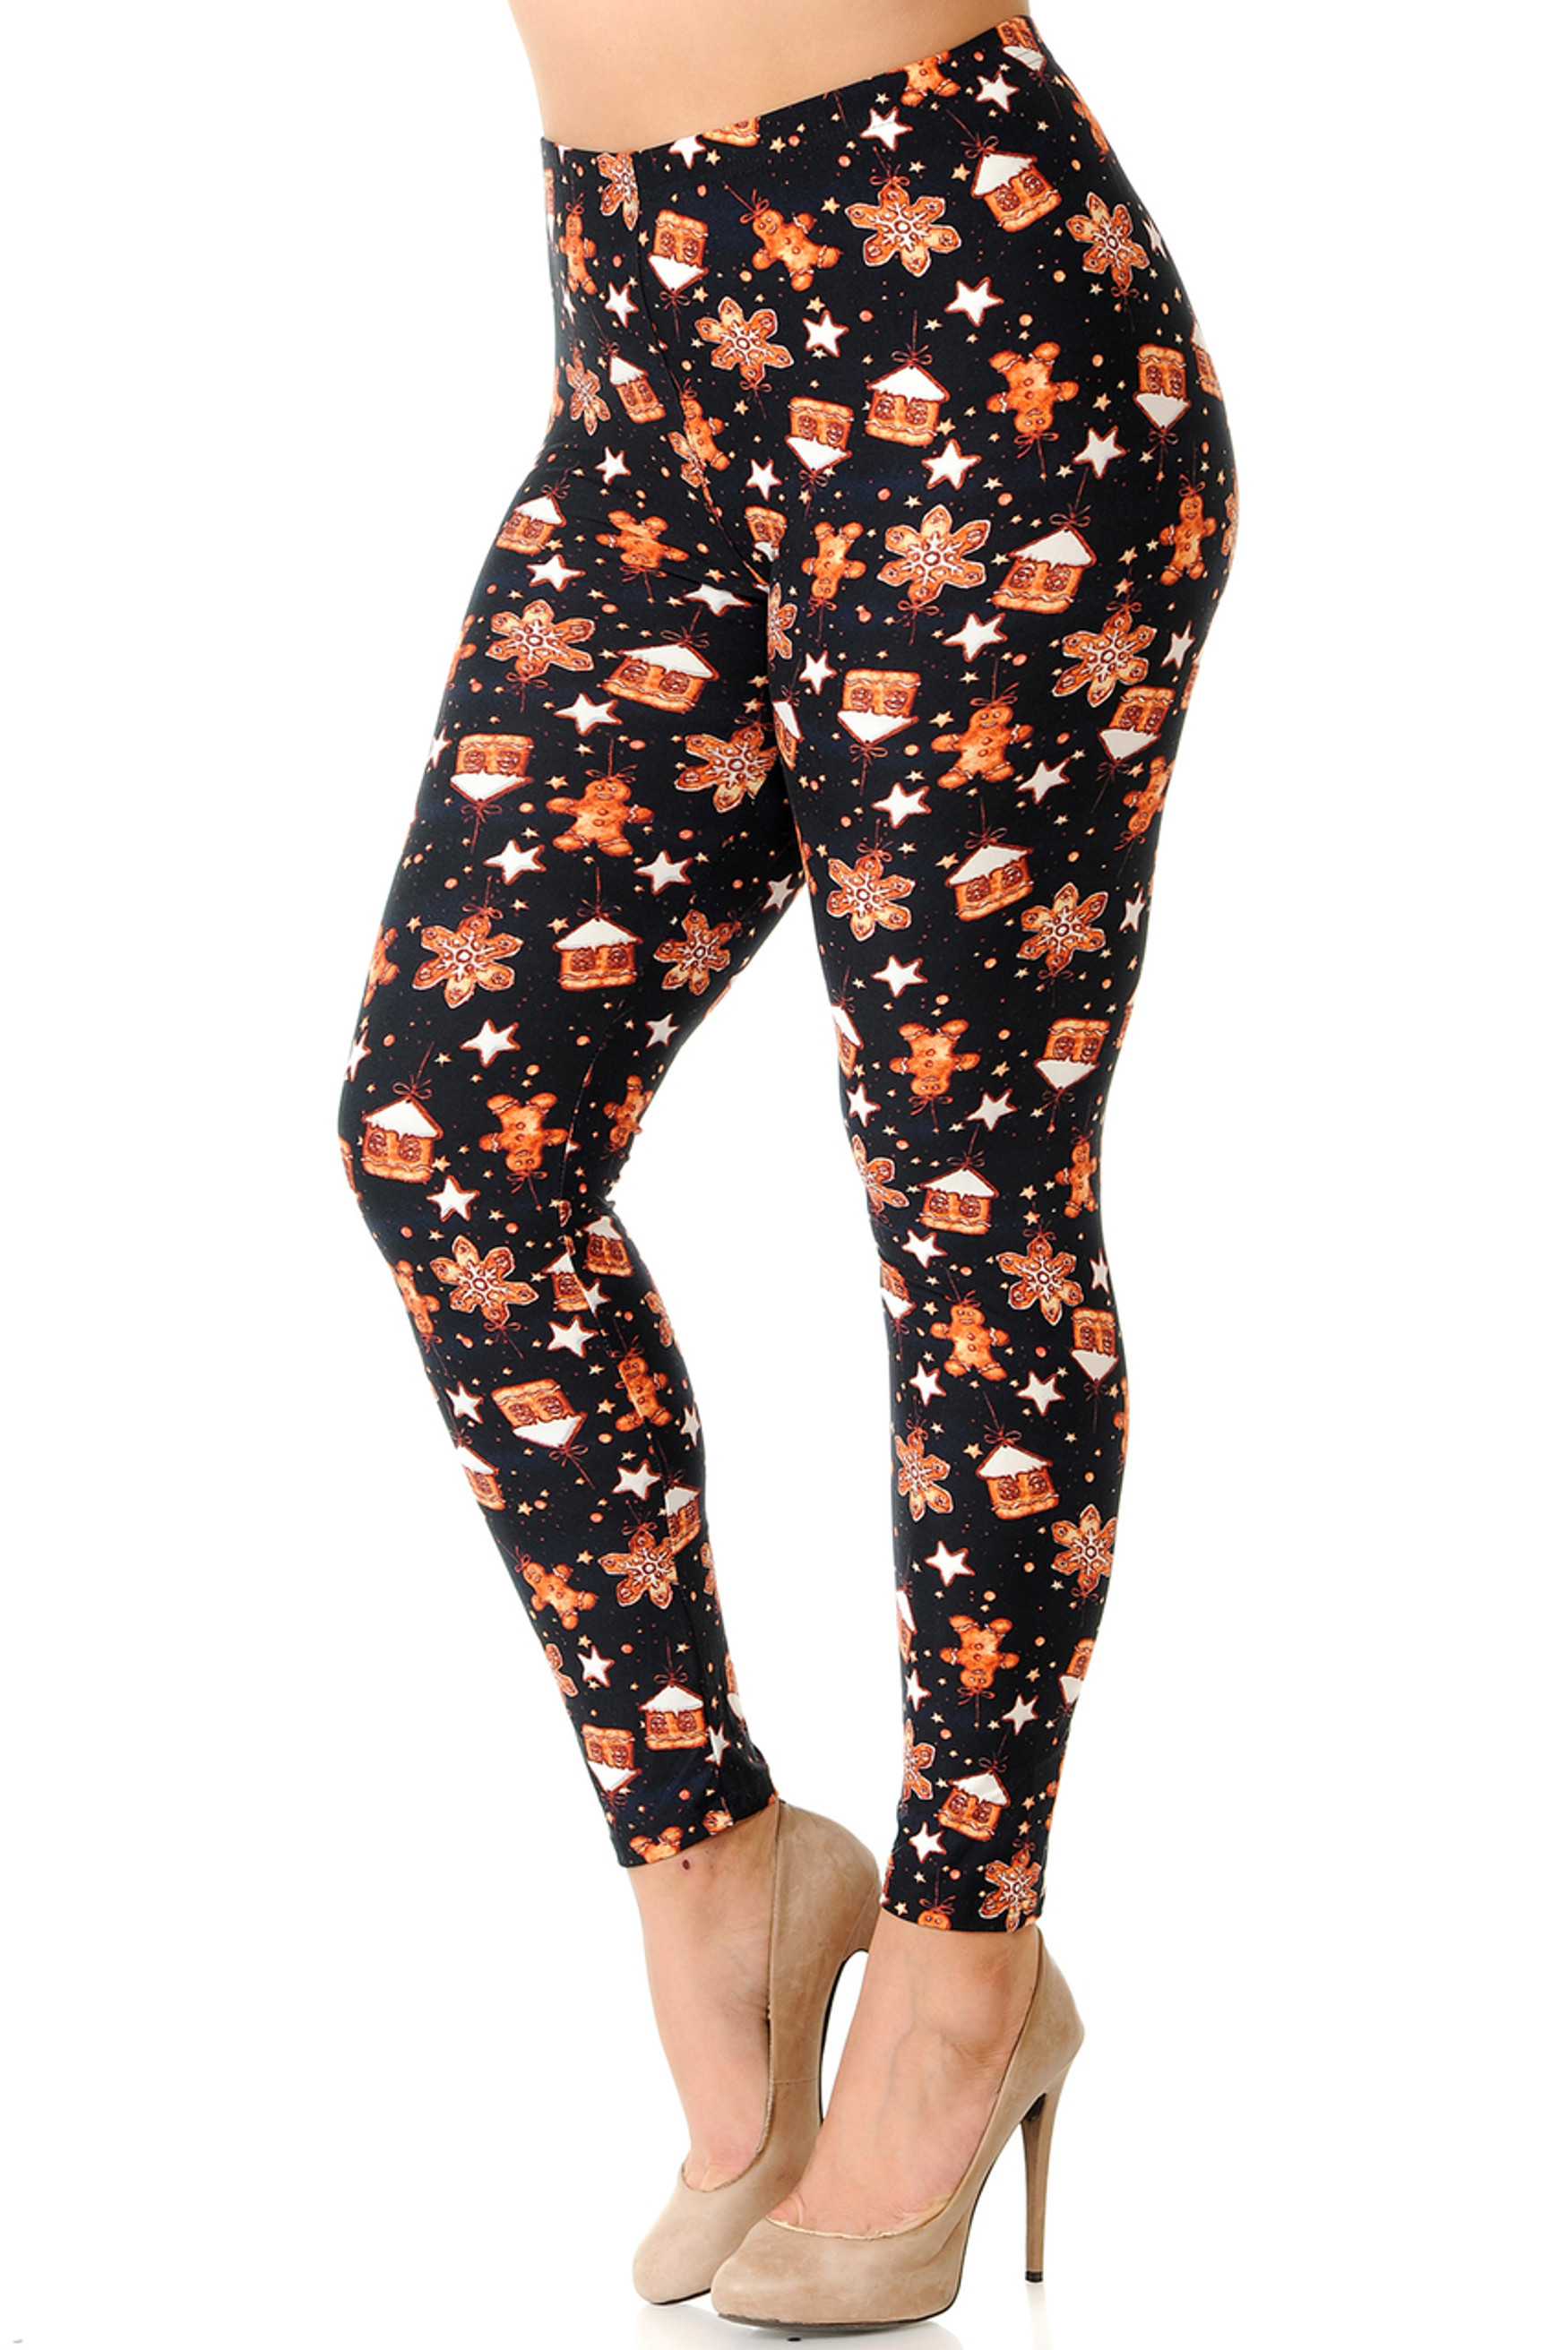 Buttery Soft Gingerbread Christmas Extra Plus Size Leggings - 3X-5X